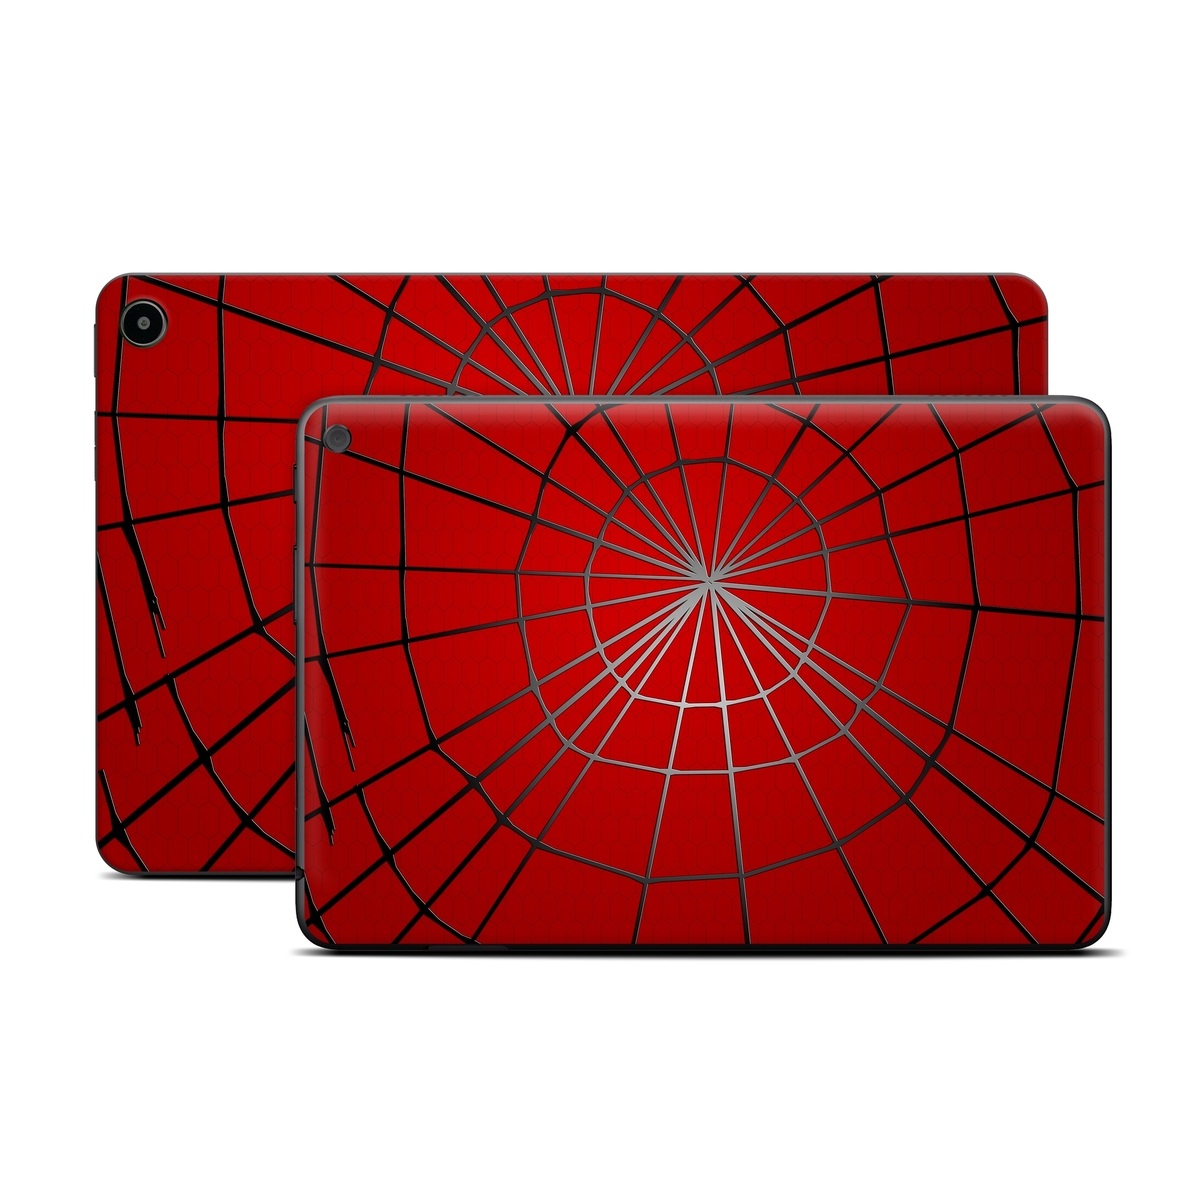 Amazon Fire Tablet Series Skin Skin design of Red, Symmetry, Circle, Pattern, Line, with red, black, gray colors